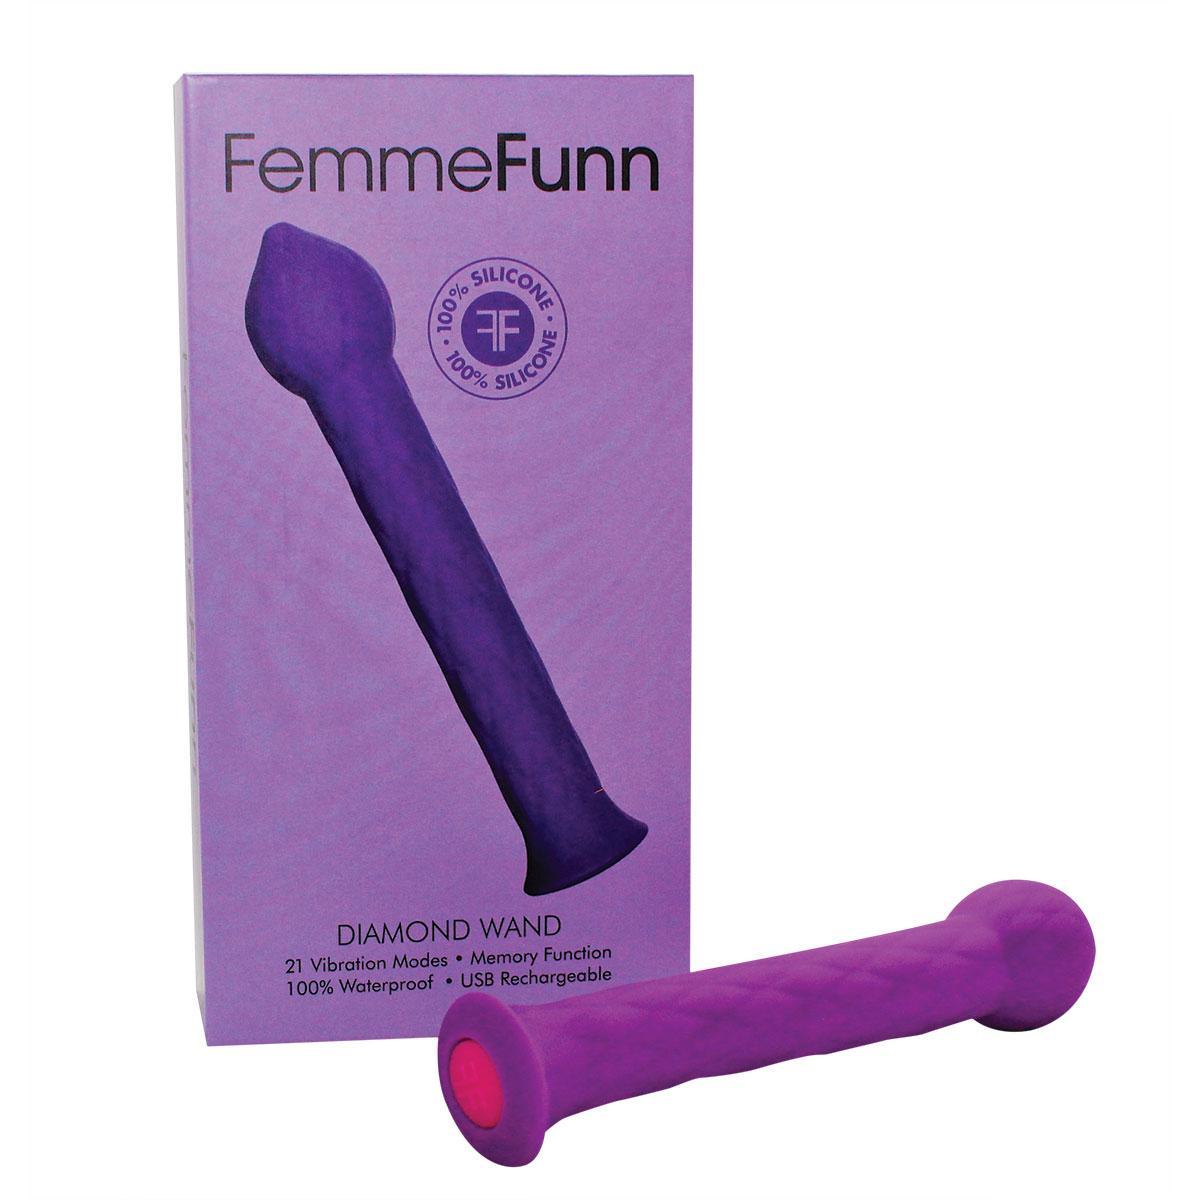 Femme Funn Diamond Wand - Buy At Luxury Toy X - Free 3-Day Shipping